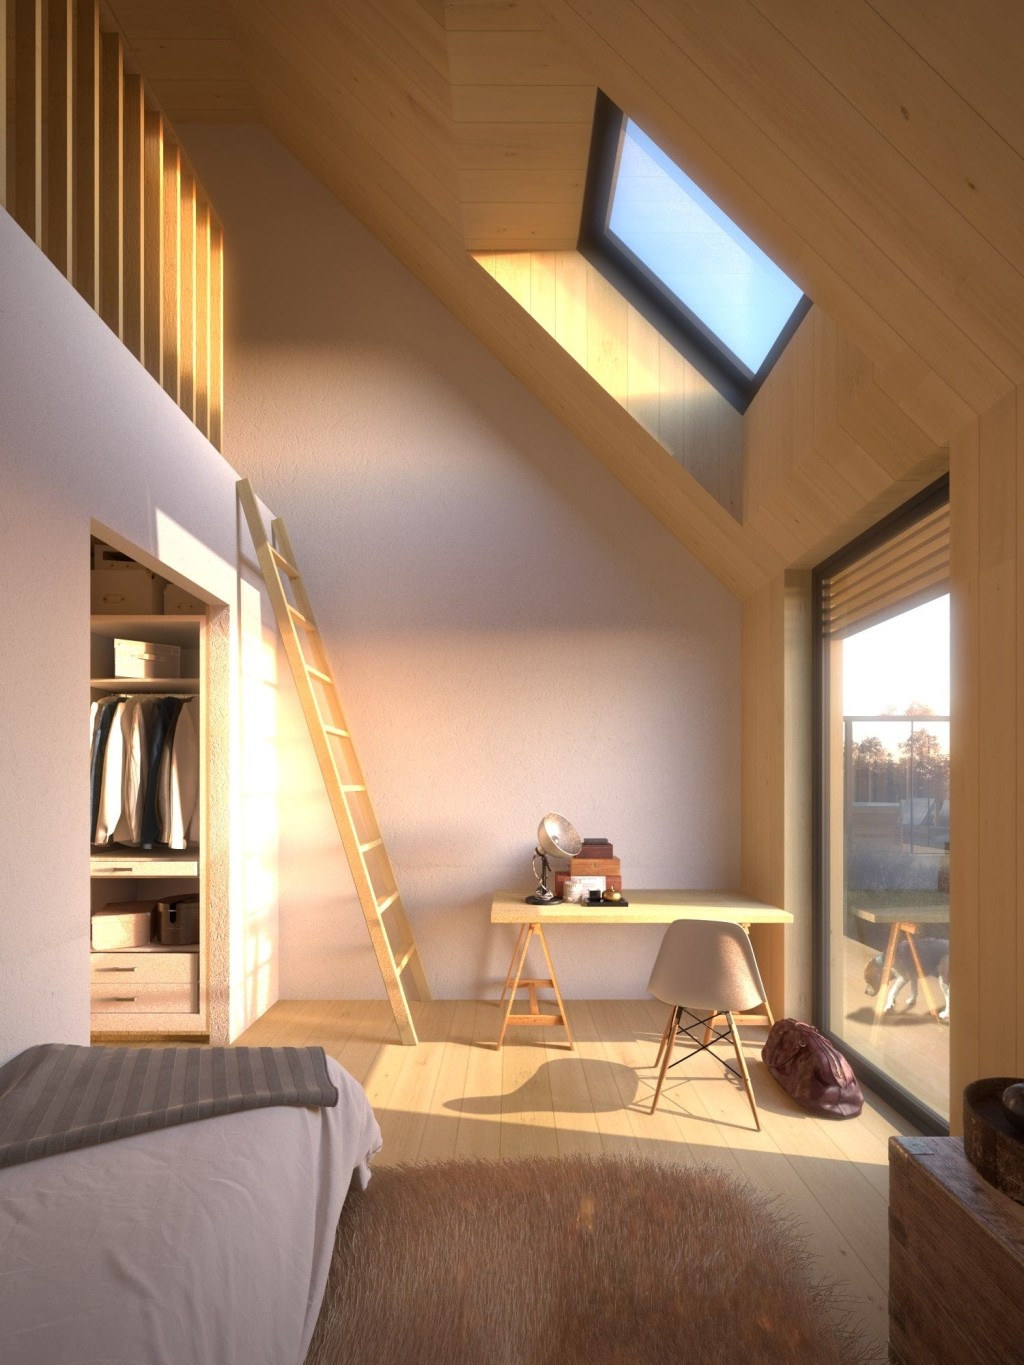 Sun-drenched bedroom in a barn conversion with skylight windows, featuring natural wooden interiors, a cosy bed with a fur throw, a minimalist desk with vintage decor, and a ladder leading to an upper nook, encapsulating modern rustic elegance.